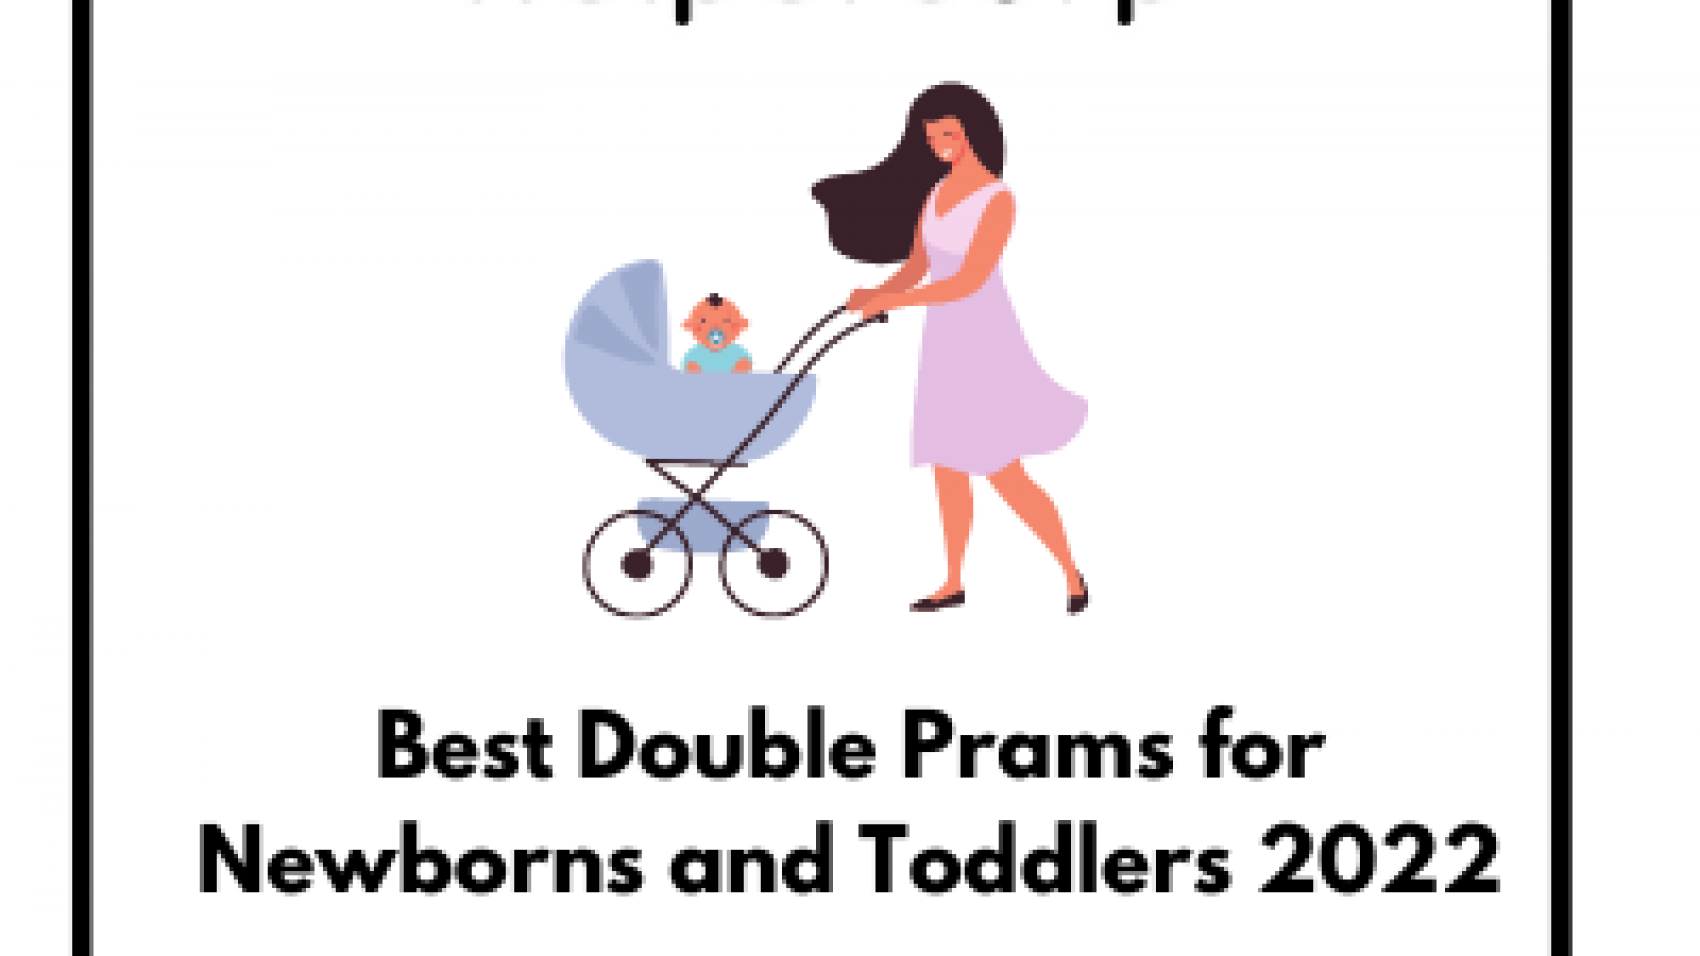 Best-Double-Prams-for-Newborns-and-Toddlers-2022